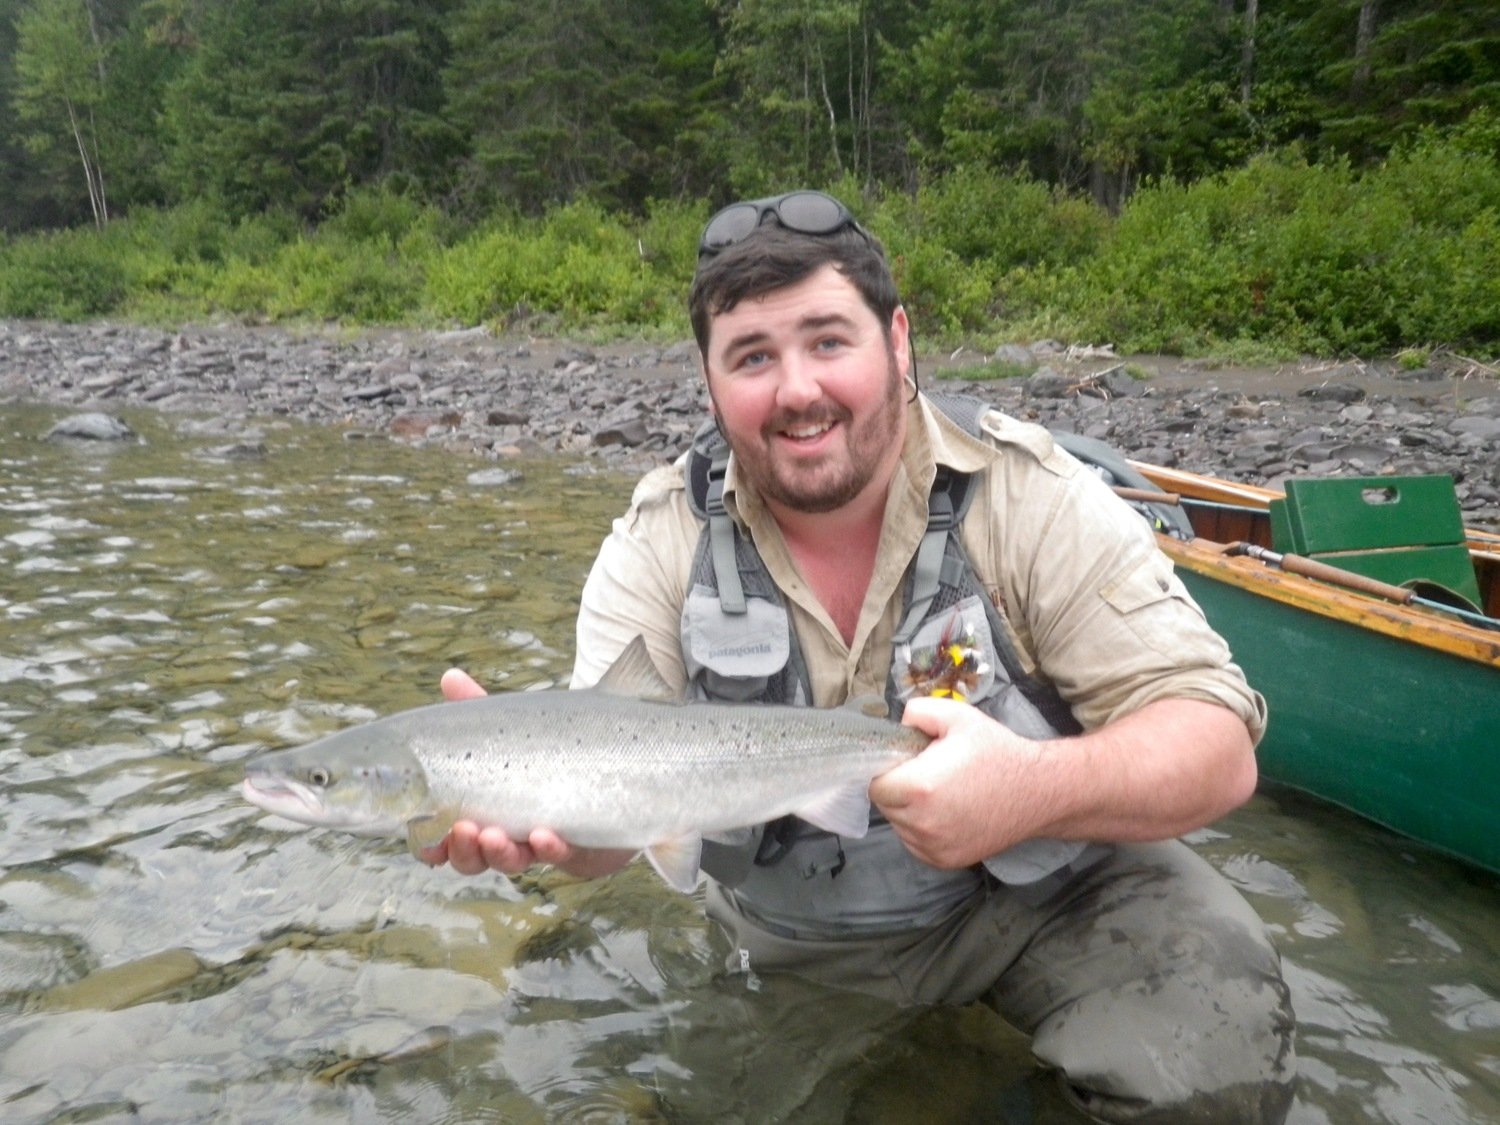 Michael with another one of his Atlantic Salmon